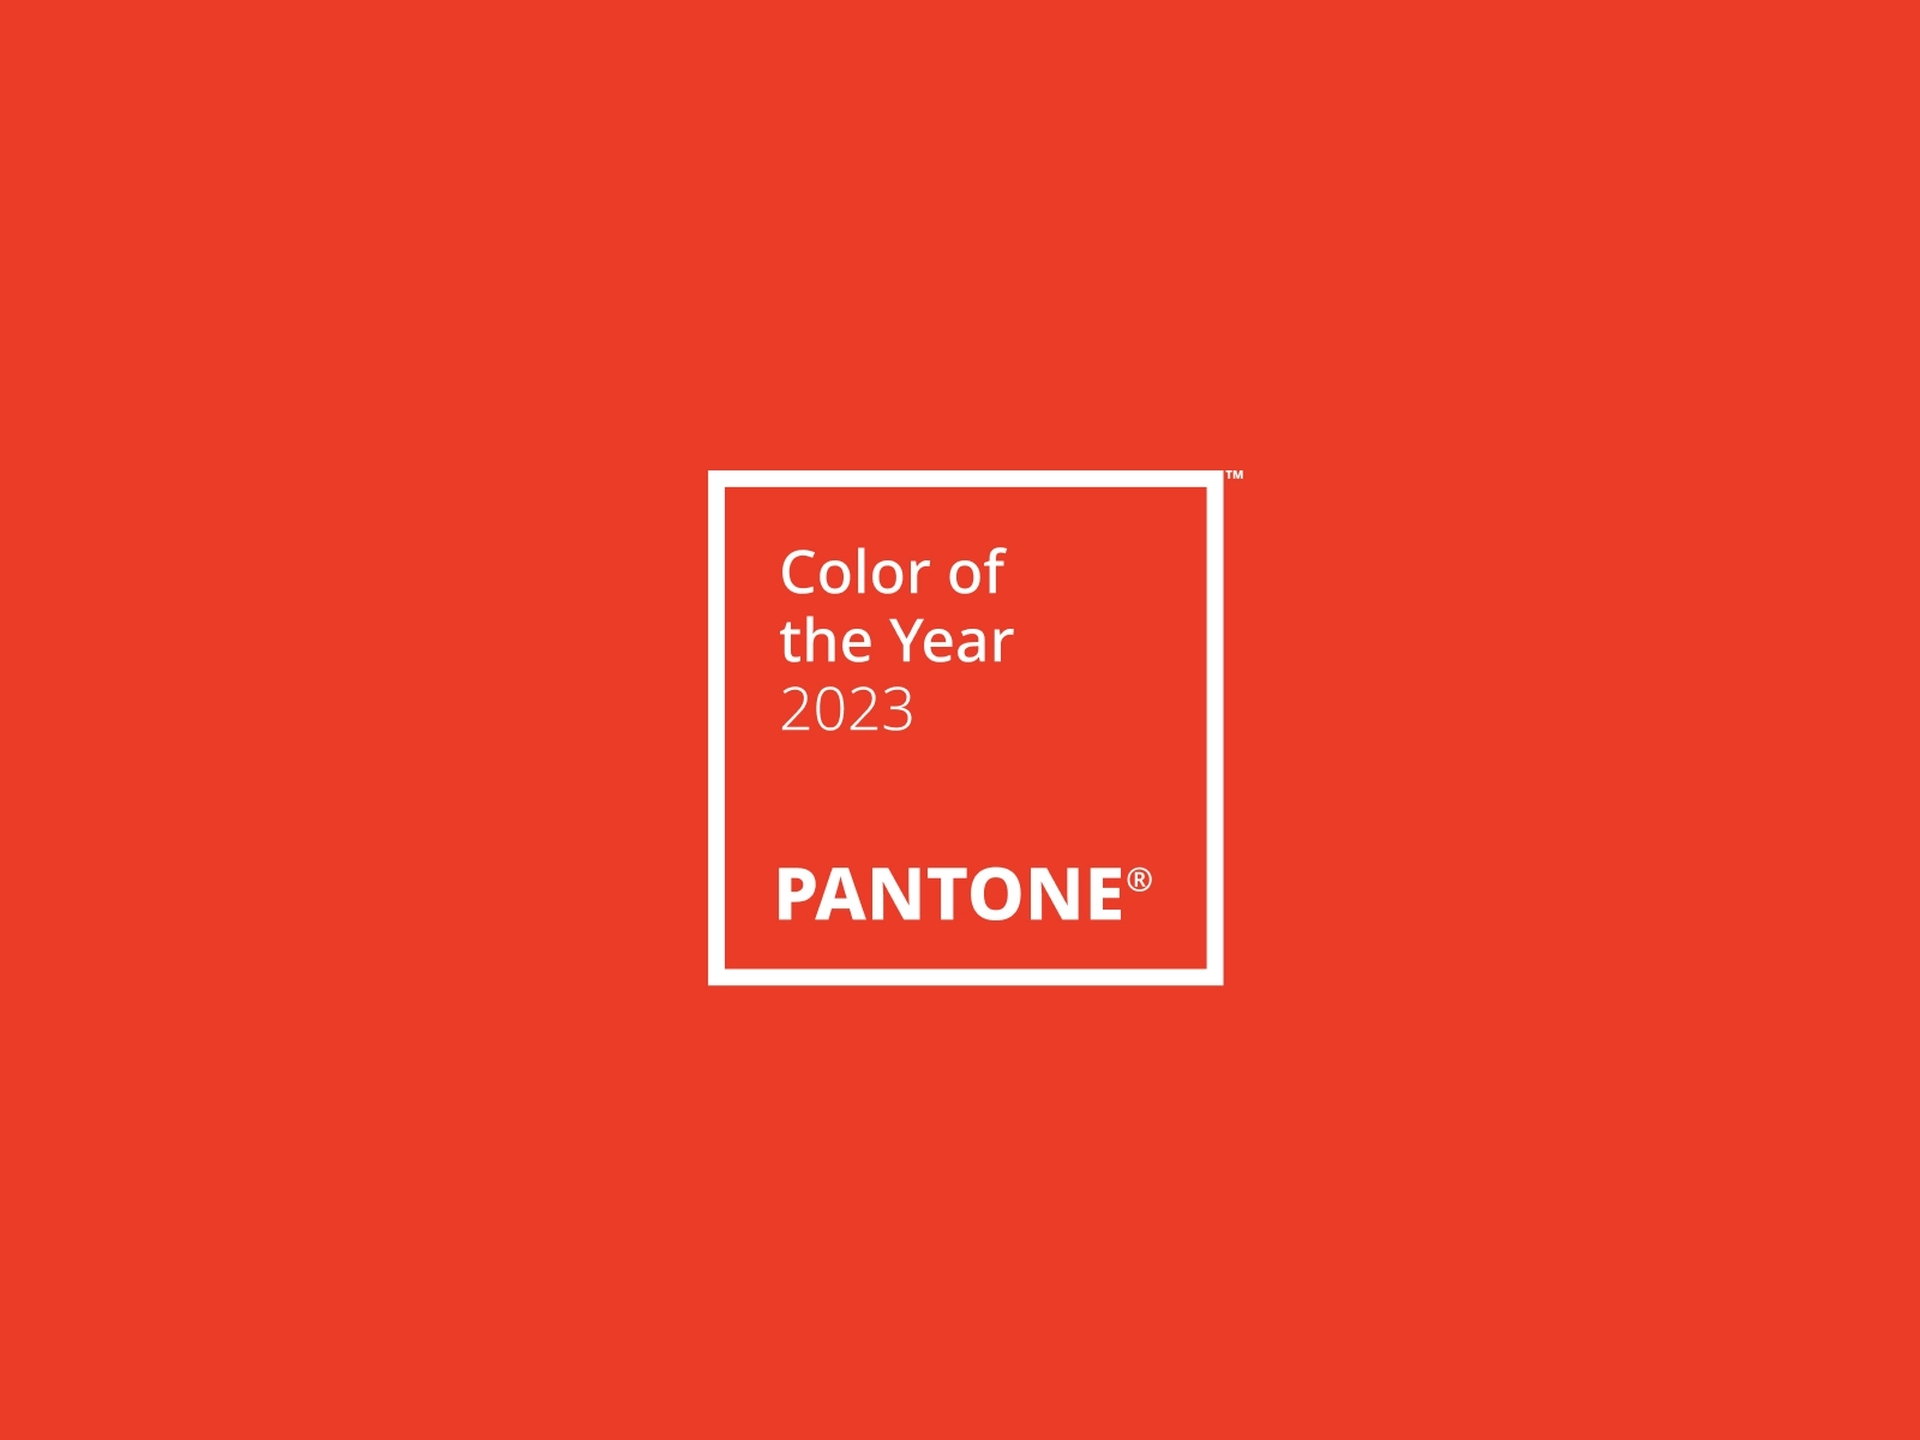 Pantone Color of the Year 2023 has been announced and the Viva Magenta is set to be seen all over fashion and goods as Pantone specializes in these color...